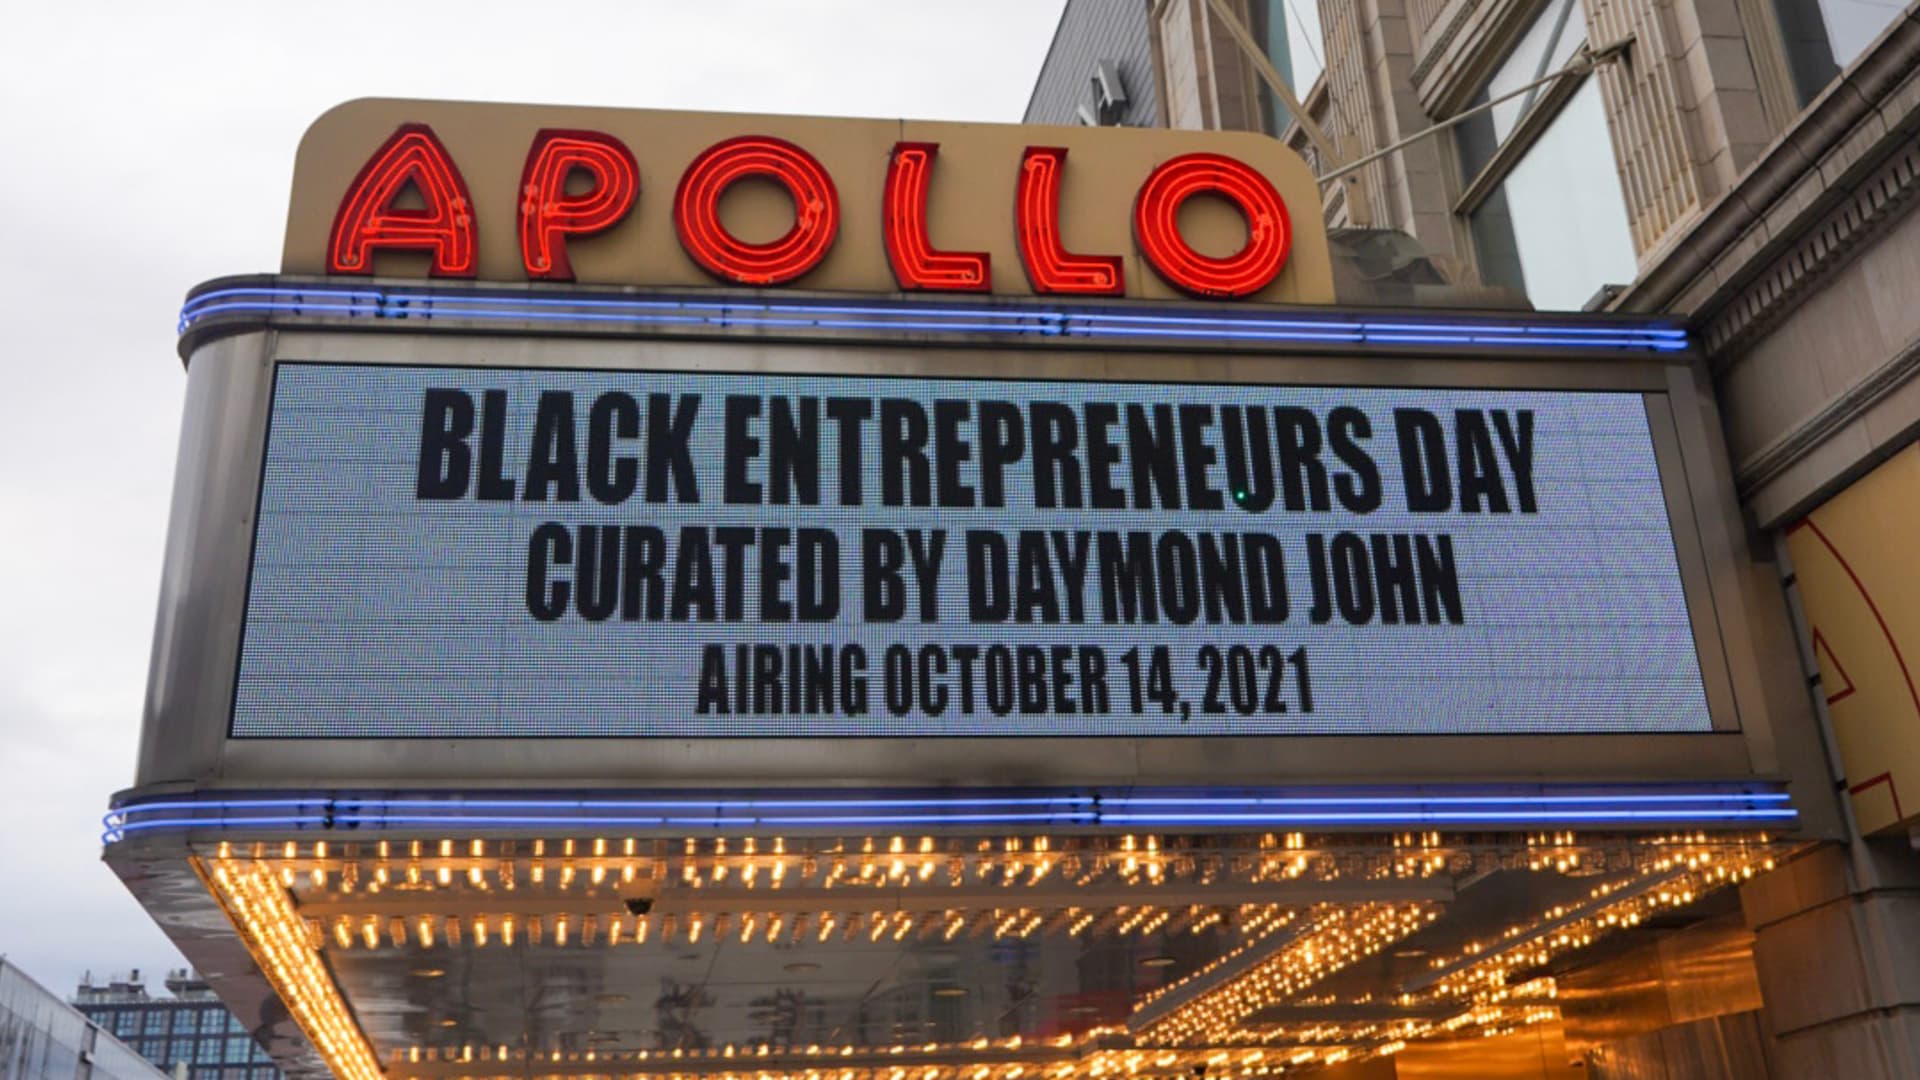 The marquee of the Apollo Theatre in Harlem, N.Y. displays a promotion for 'Black Entrepreneurs Day.'